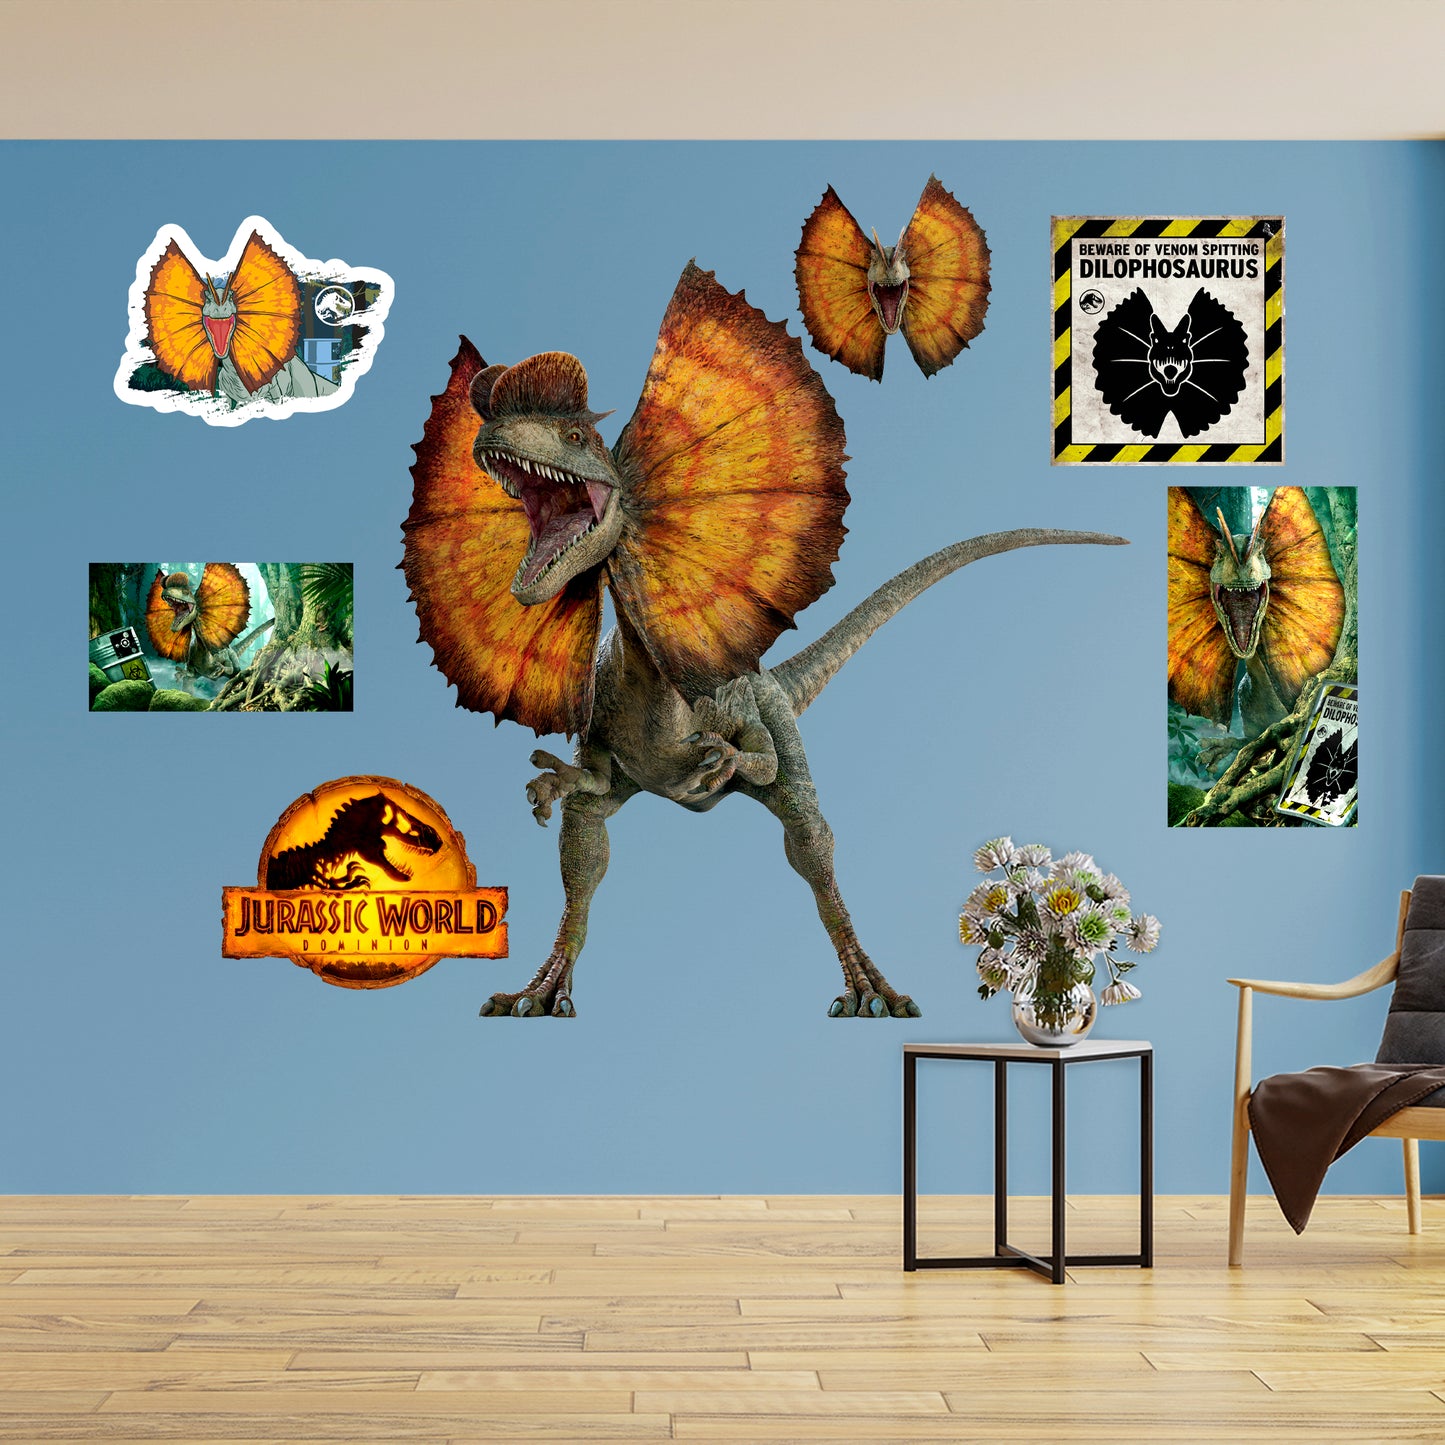 Jurassic World Dominion: Dilophosaurus RealBig - Officially Licensed NBC Universal Removable Adhesive Decal